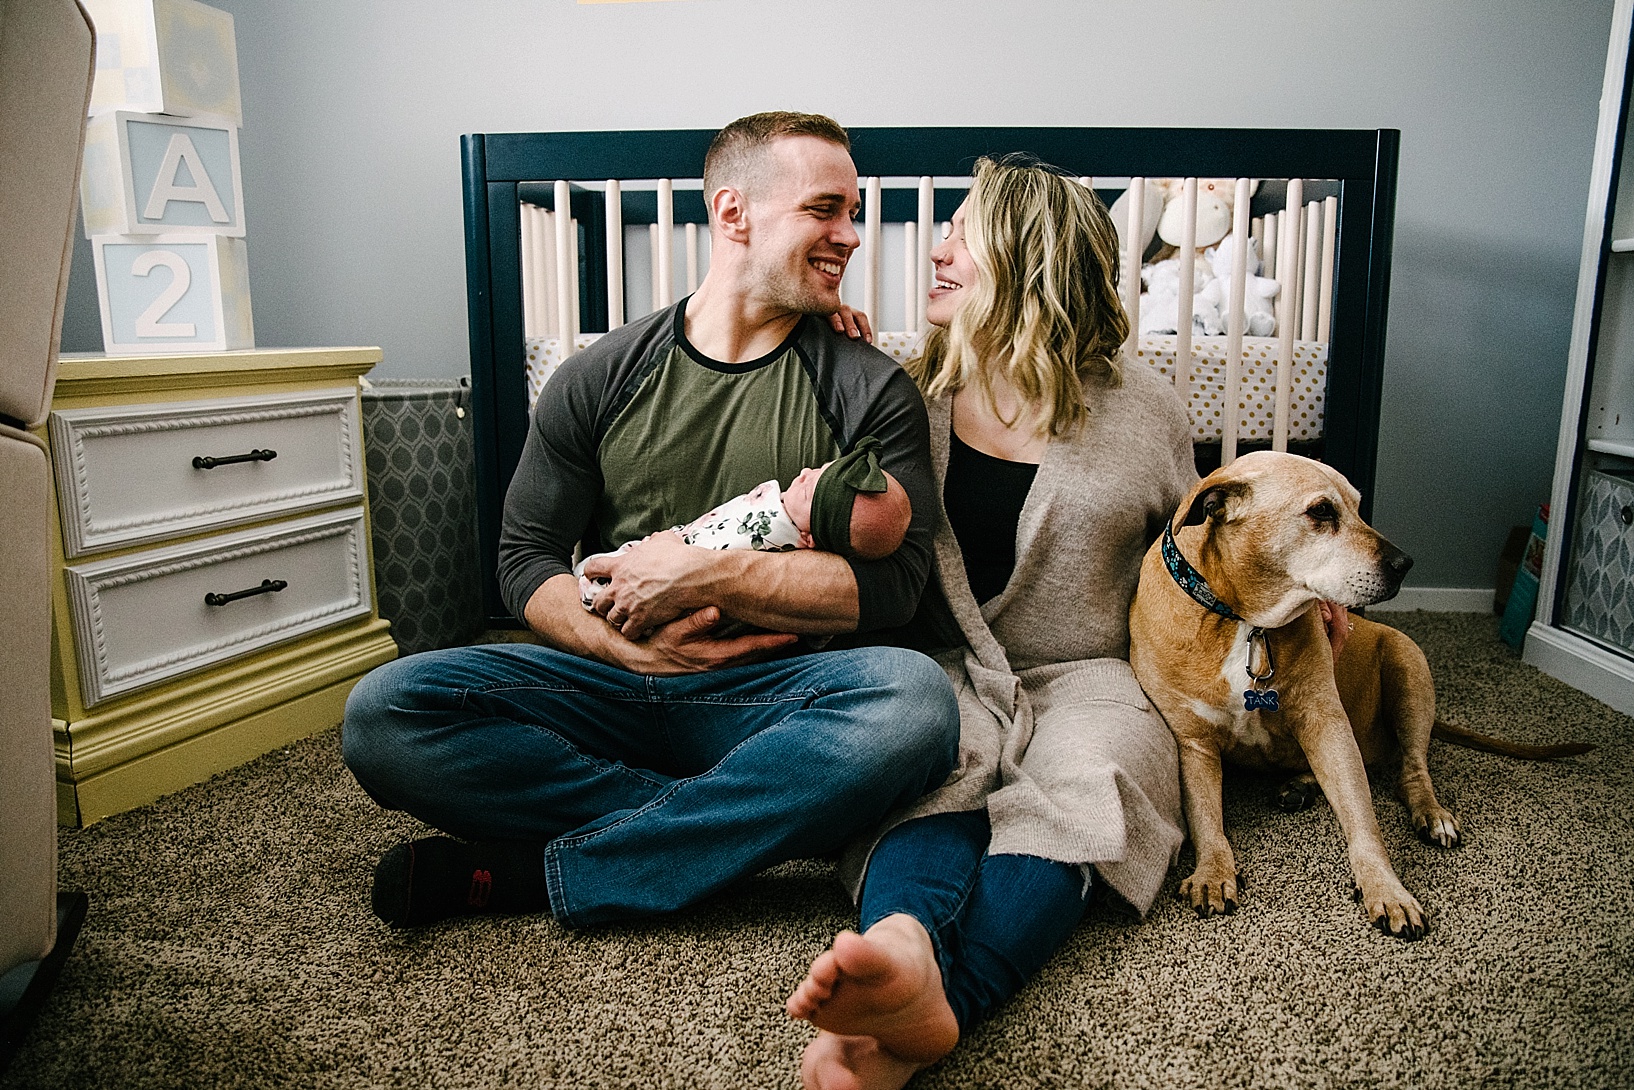 mom and dad sitting on floor of nursery holding newborn with their dog